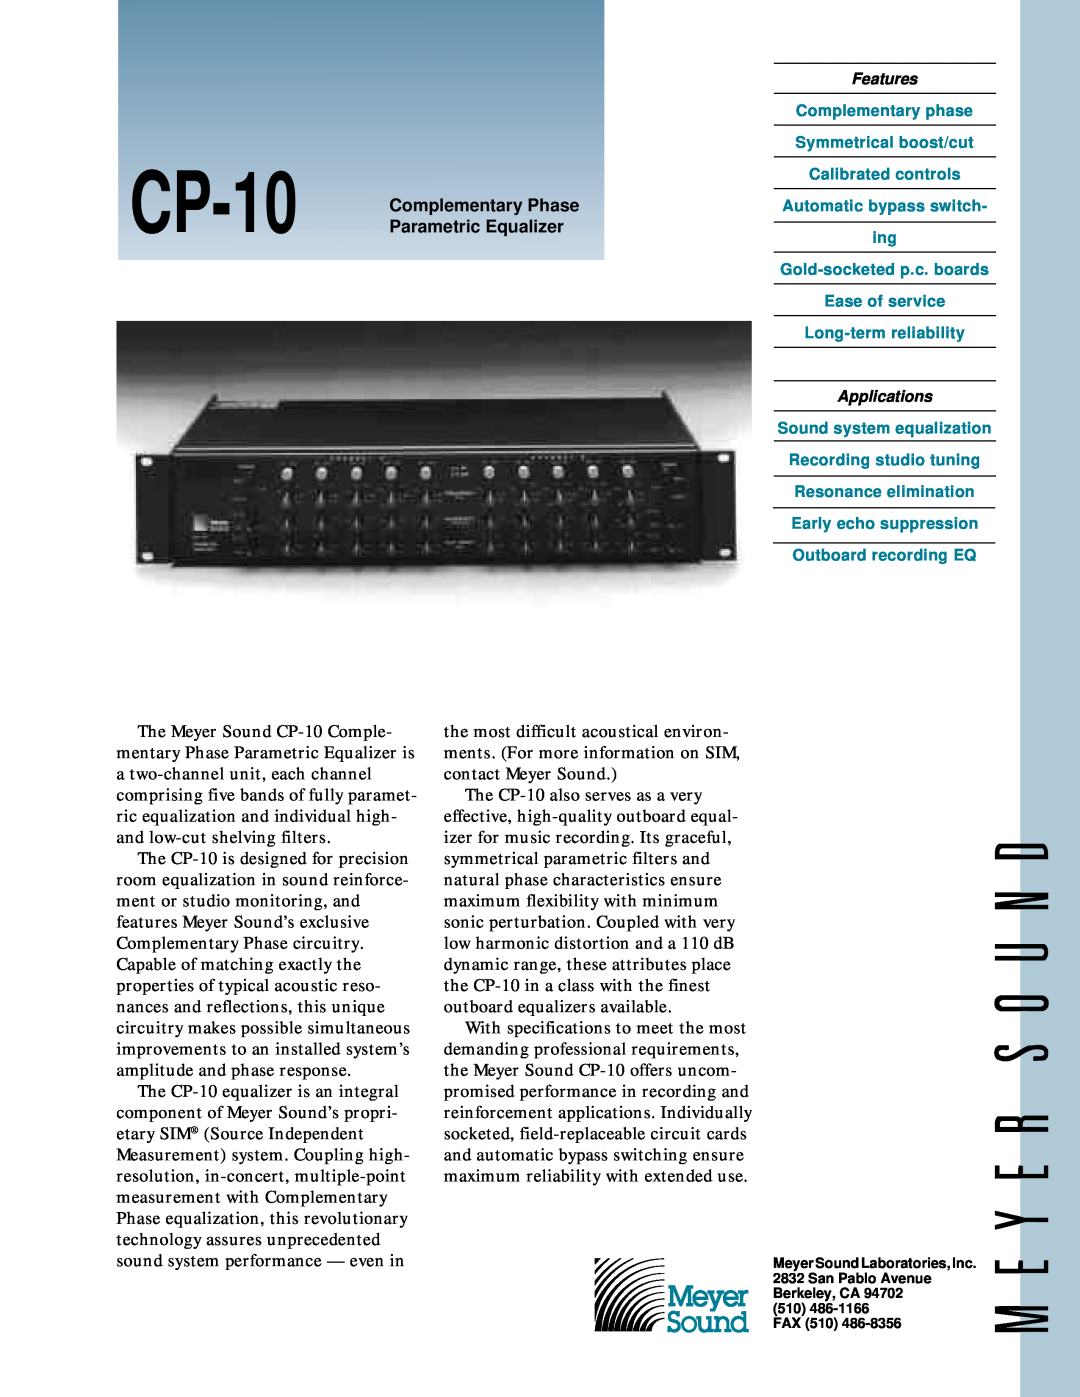 Meyer Sound CP-10 specifications Complementary Phase, Parametric Equalizer 